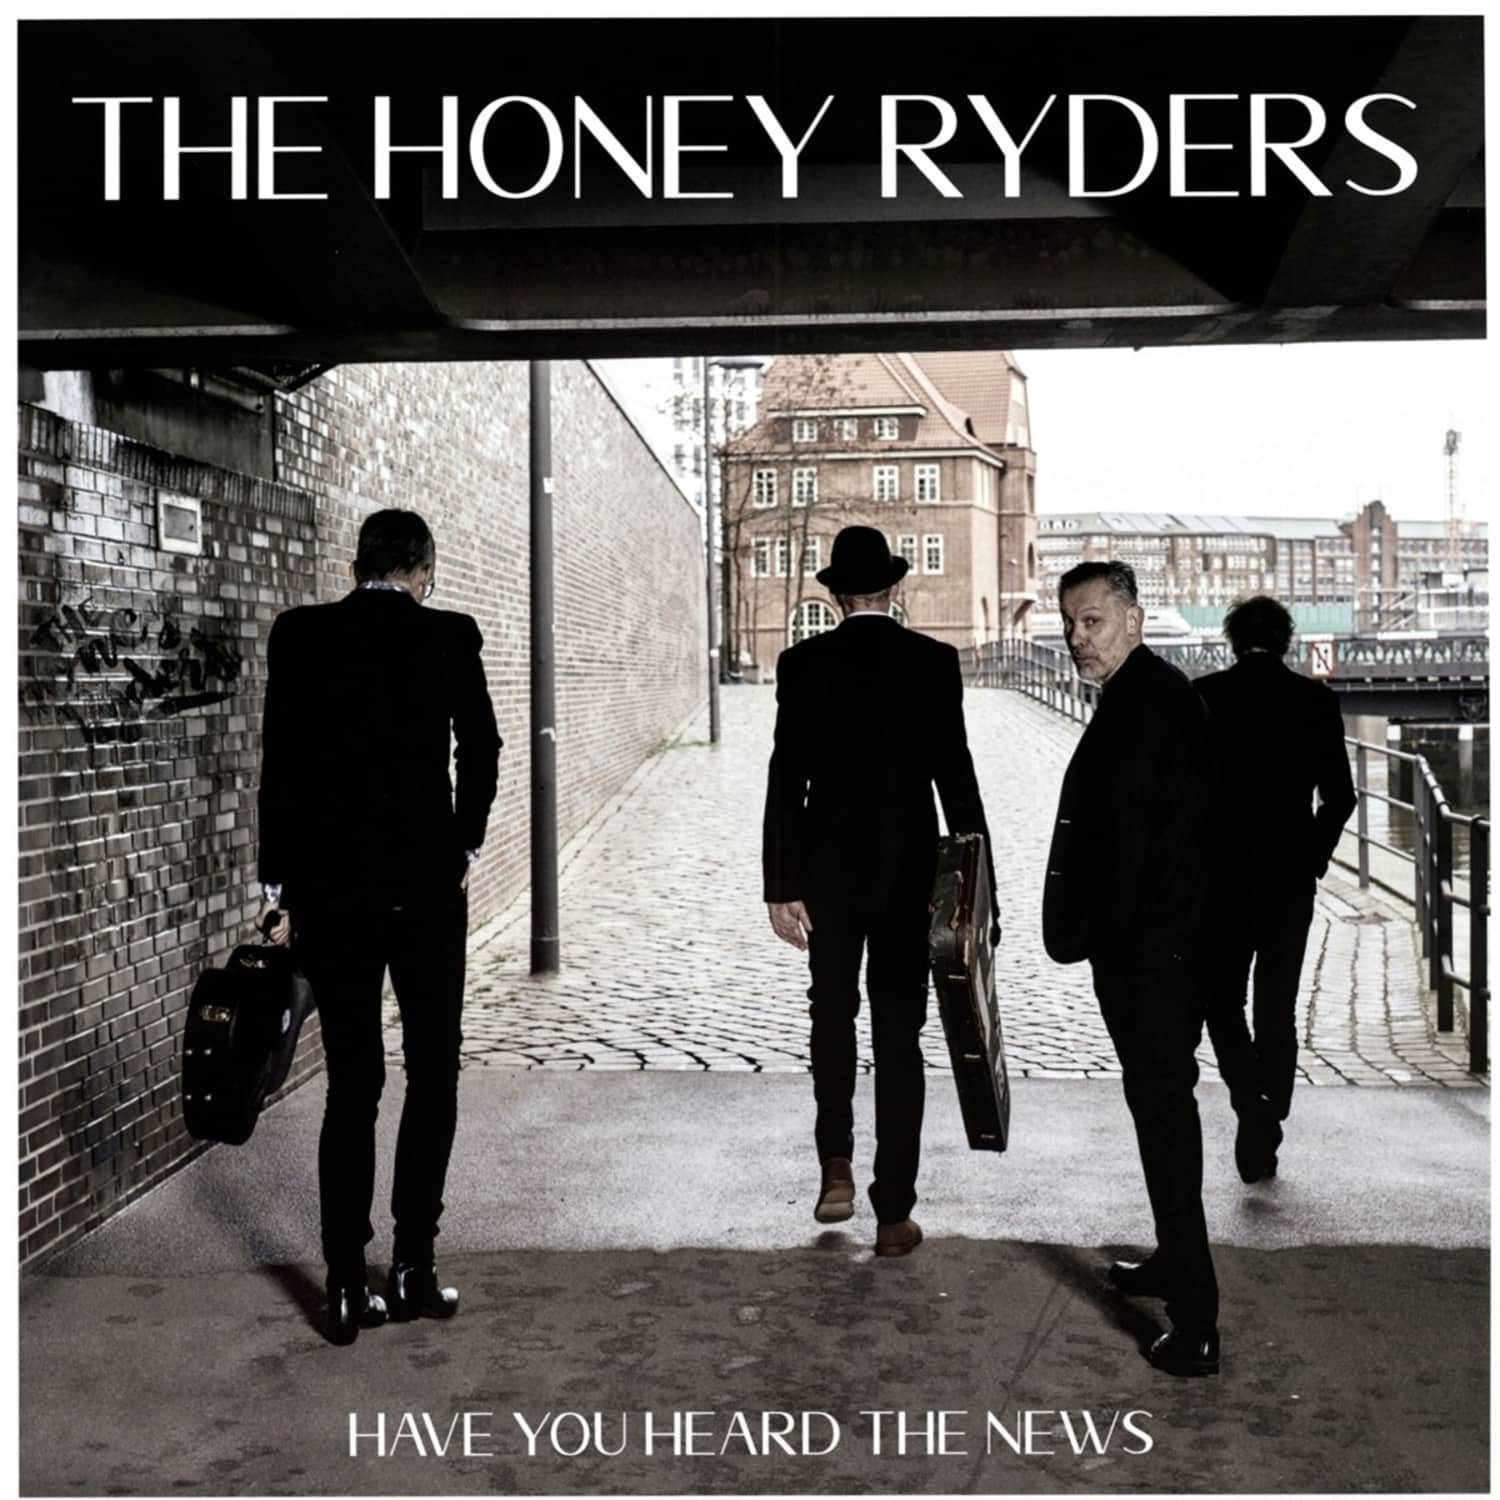 The Honey Ryders - HAVE YOU HEARD THE NEWS 